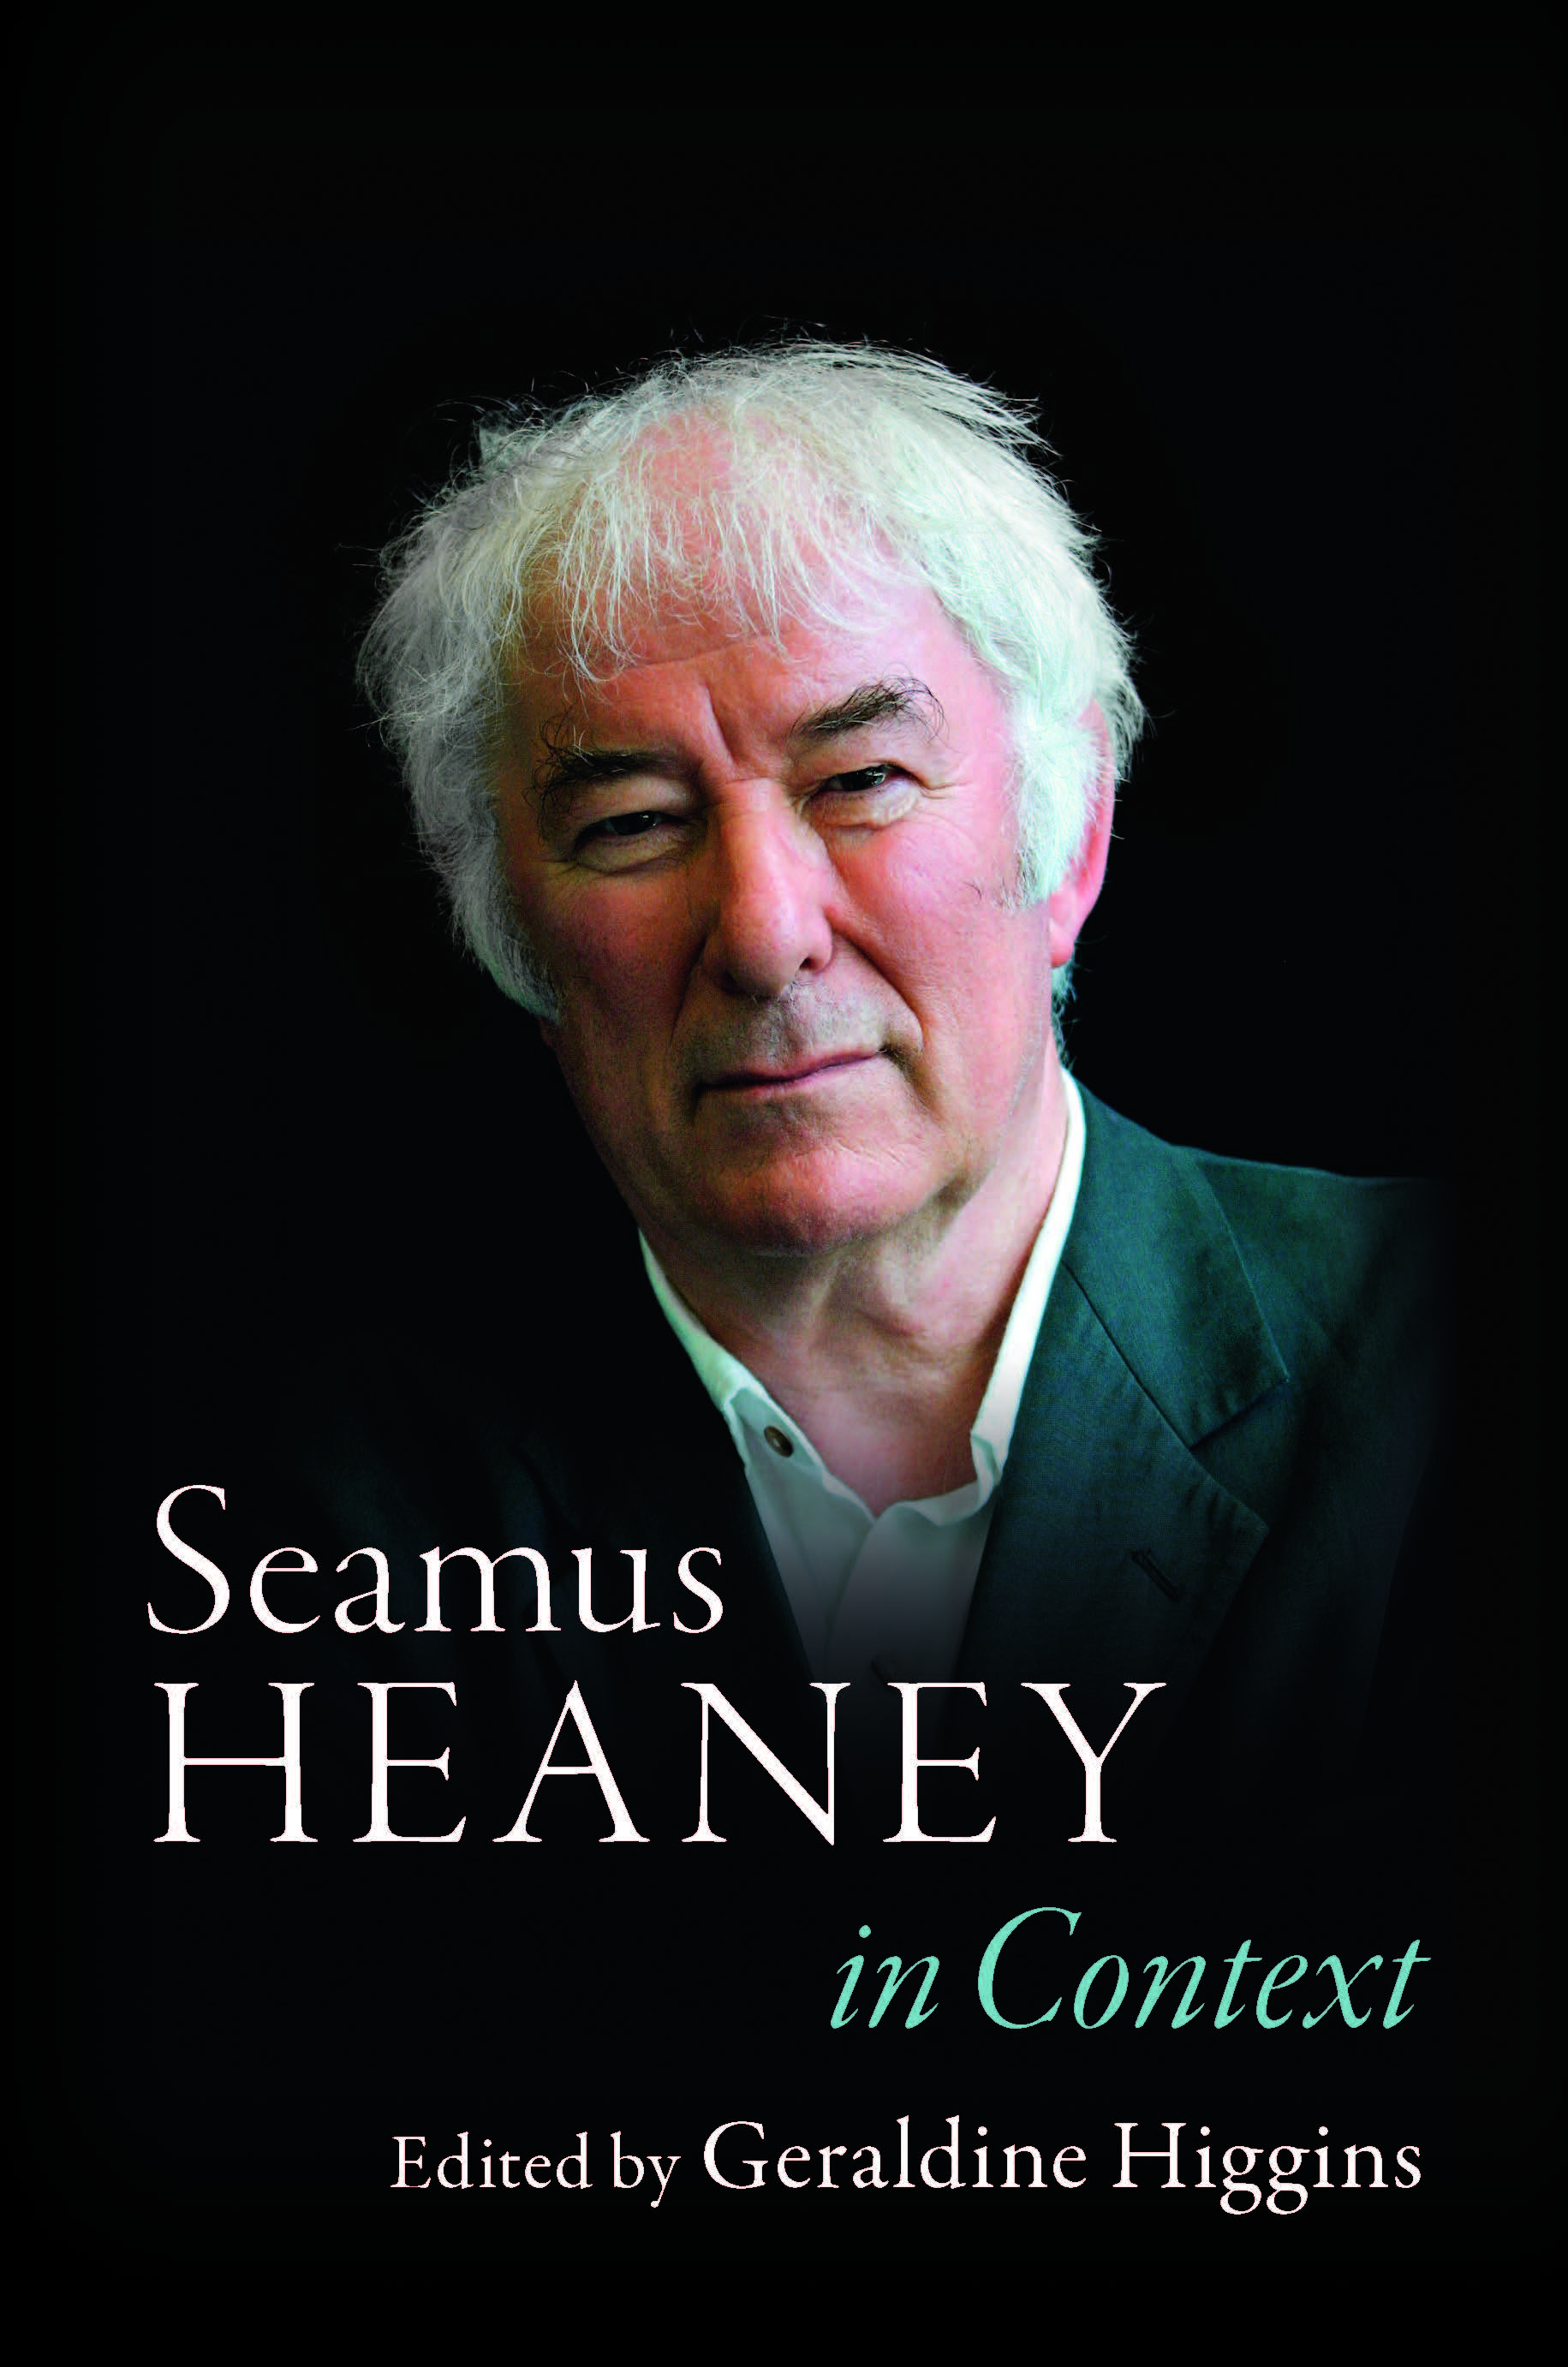 Seamus-Heaney-in-Context_Cover-.jpg